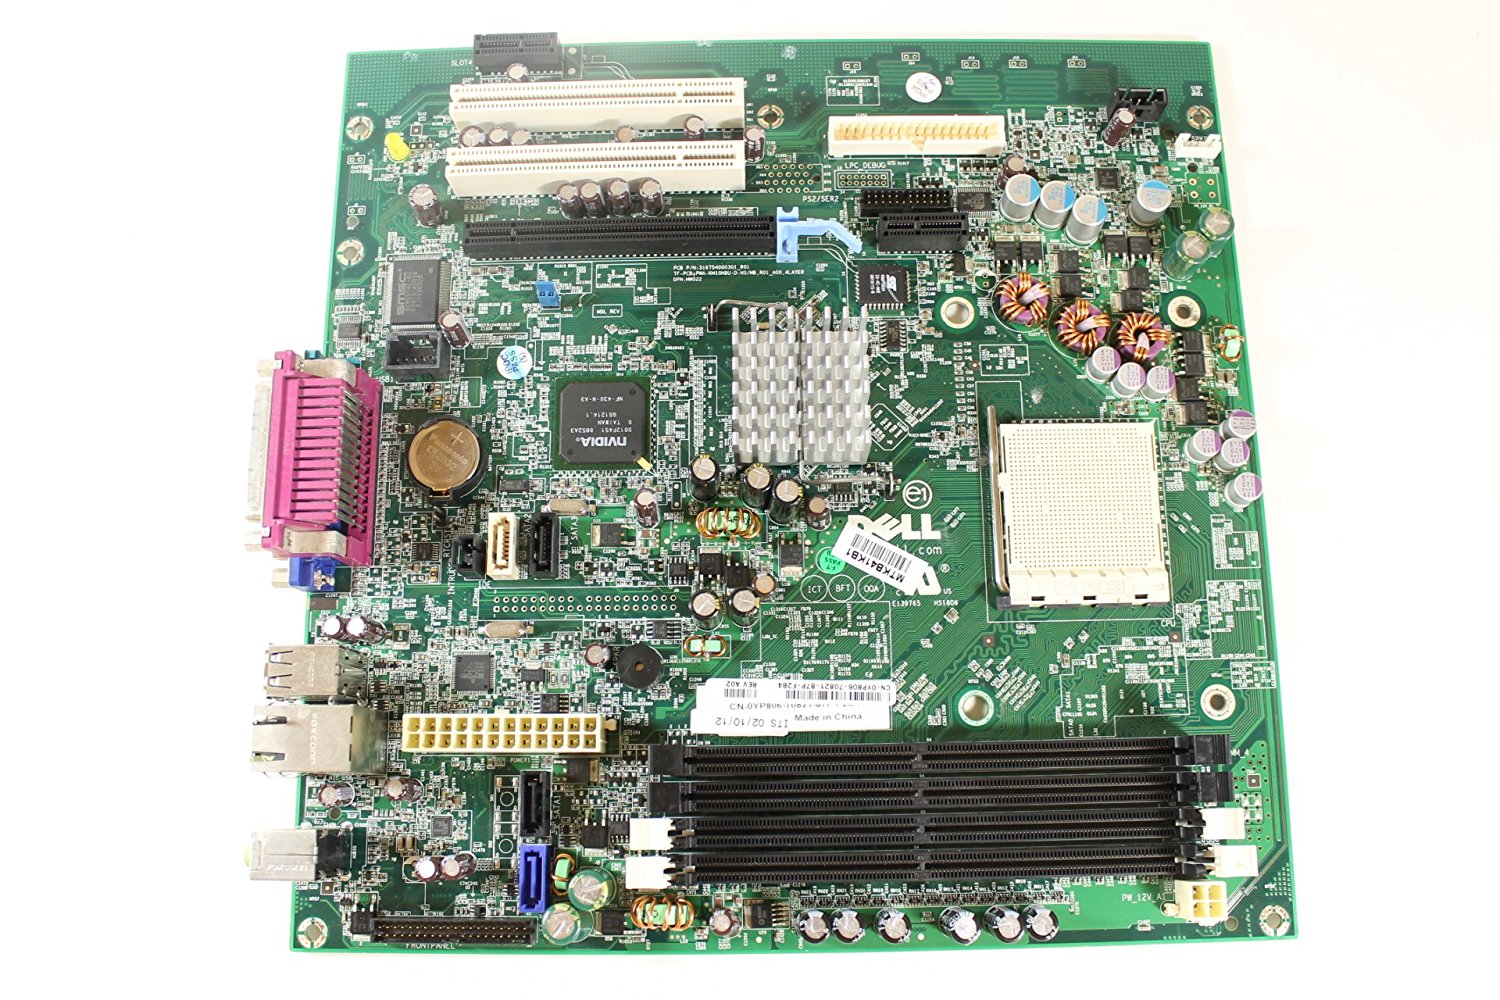 Yp806 Dell Motherboard System Board for Optiplex 740 Mini Tower Smt